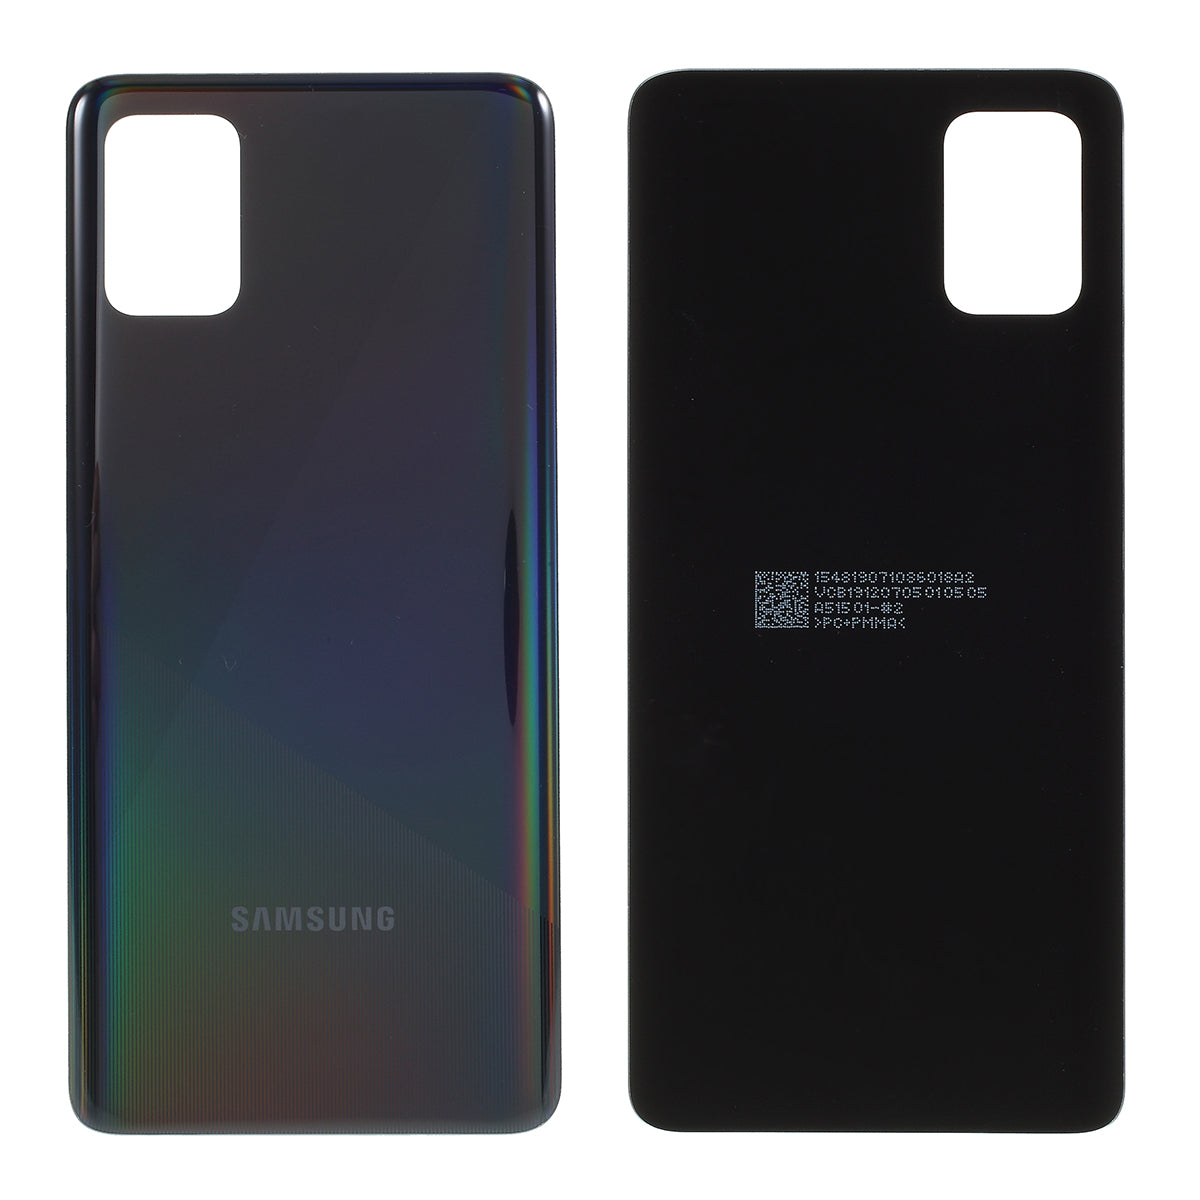 OEM for Samsung Galaxy A51 A515 Back Battery Housing without Adhesive Sticker - Black Blue